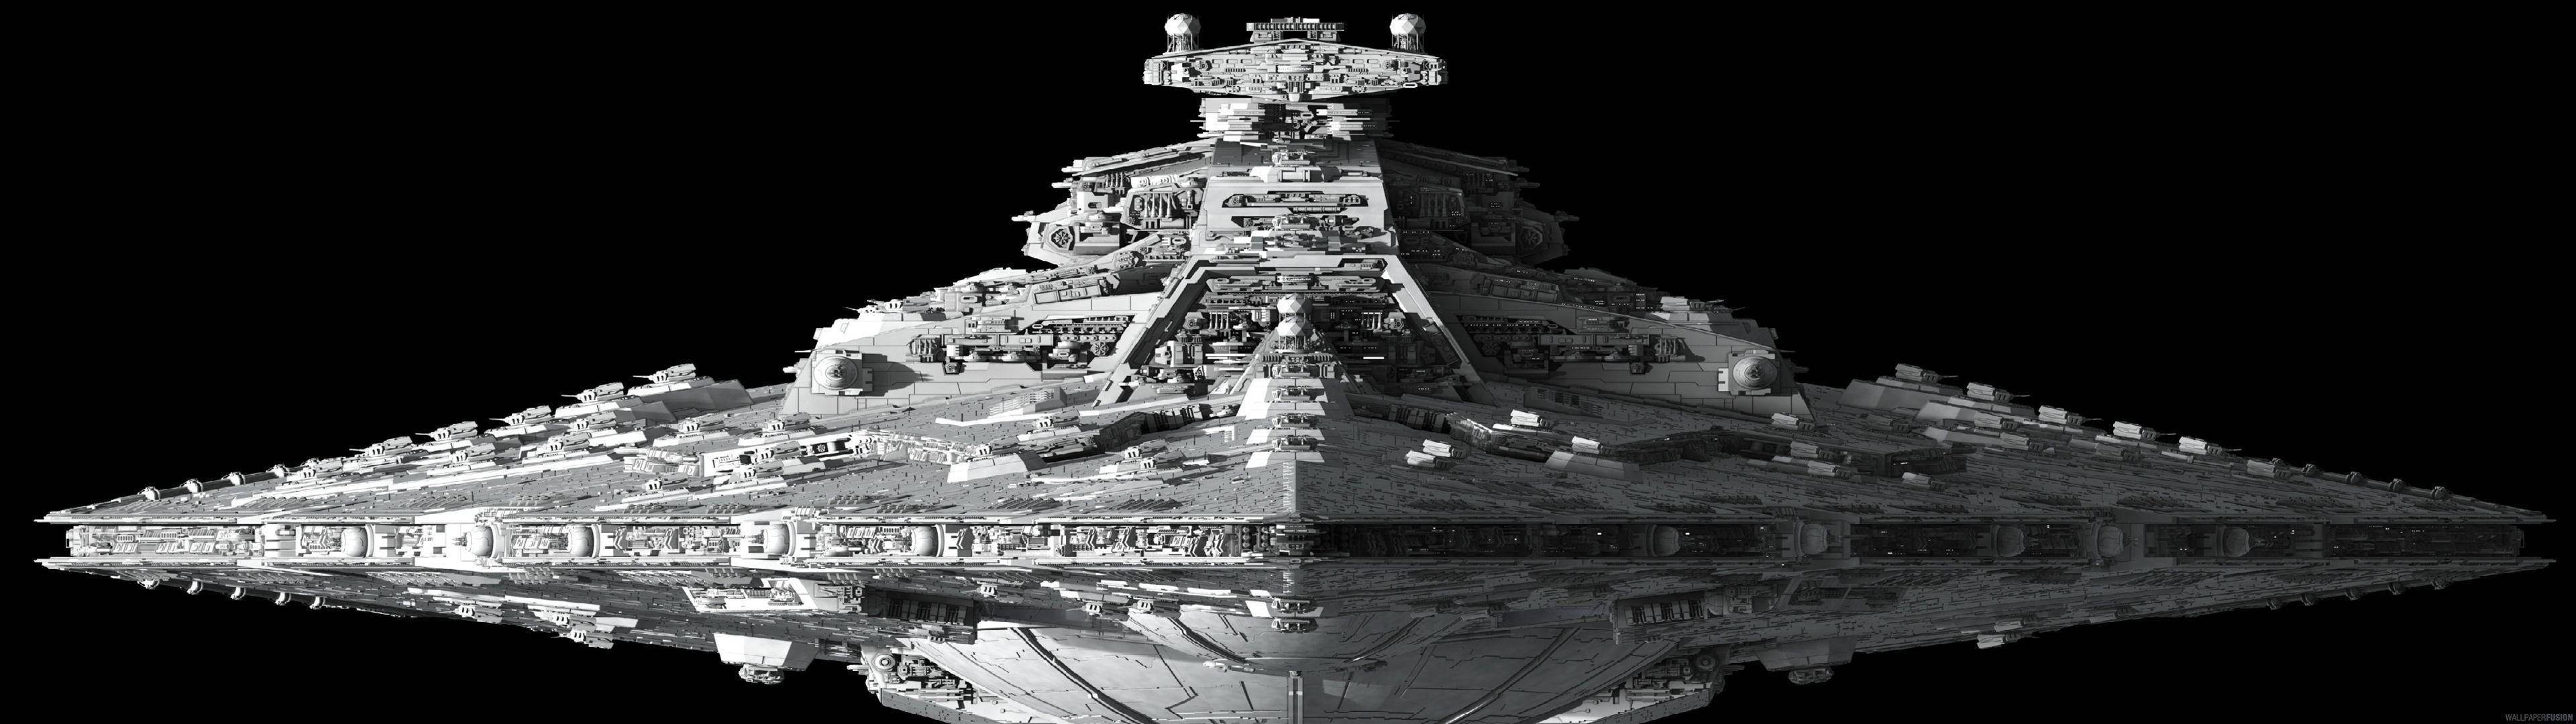 Star Destroyer Dual Monitor Picture